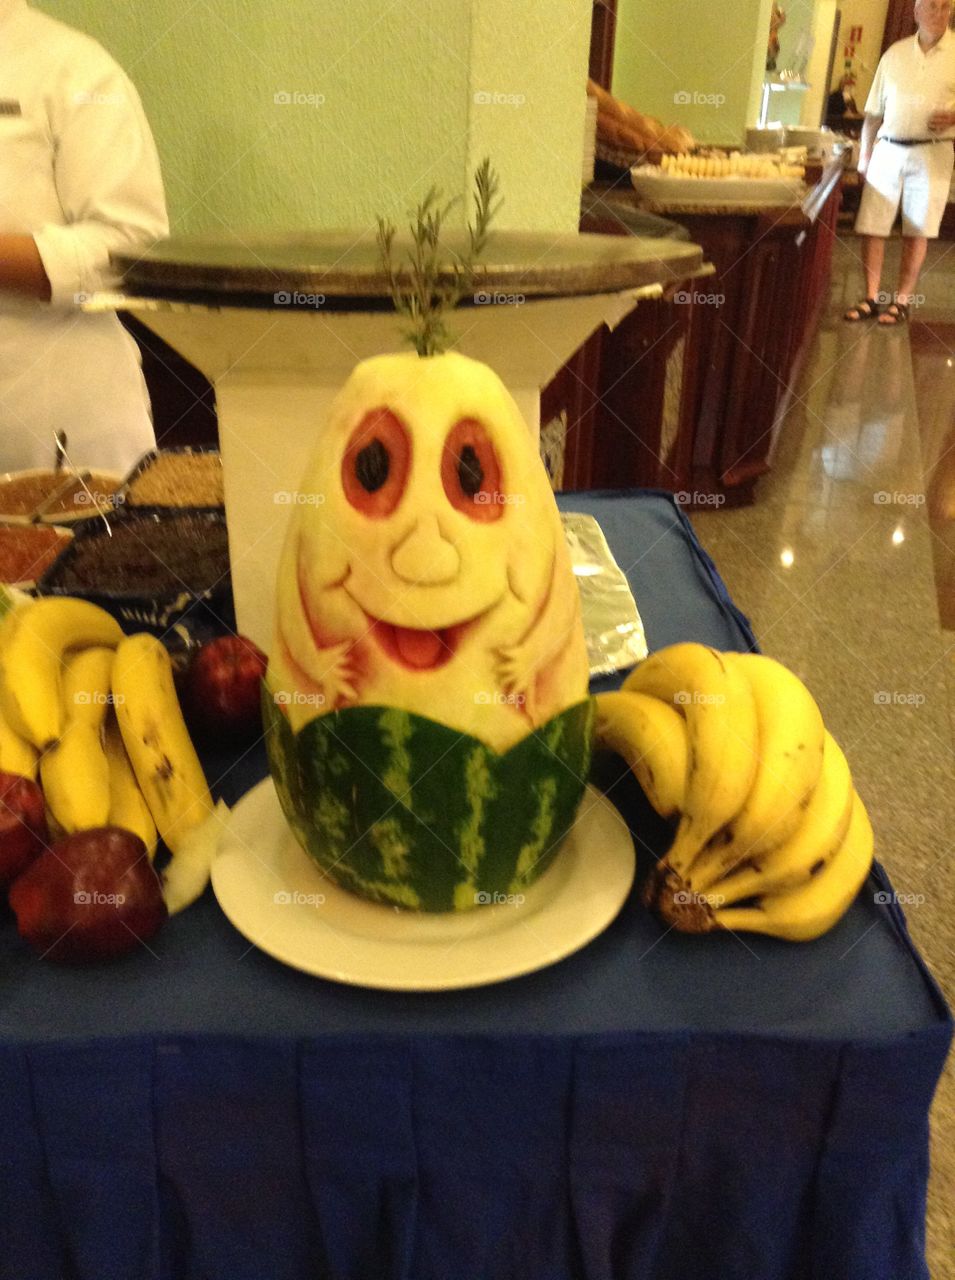 The ghost watermelon. My family was on vacation in Mexico and I saw this cut looking watermelon at dinner and decided to take a pic!